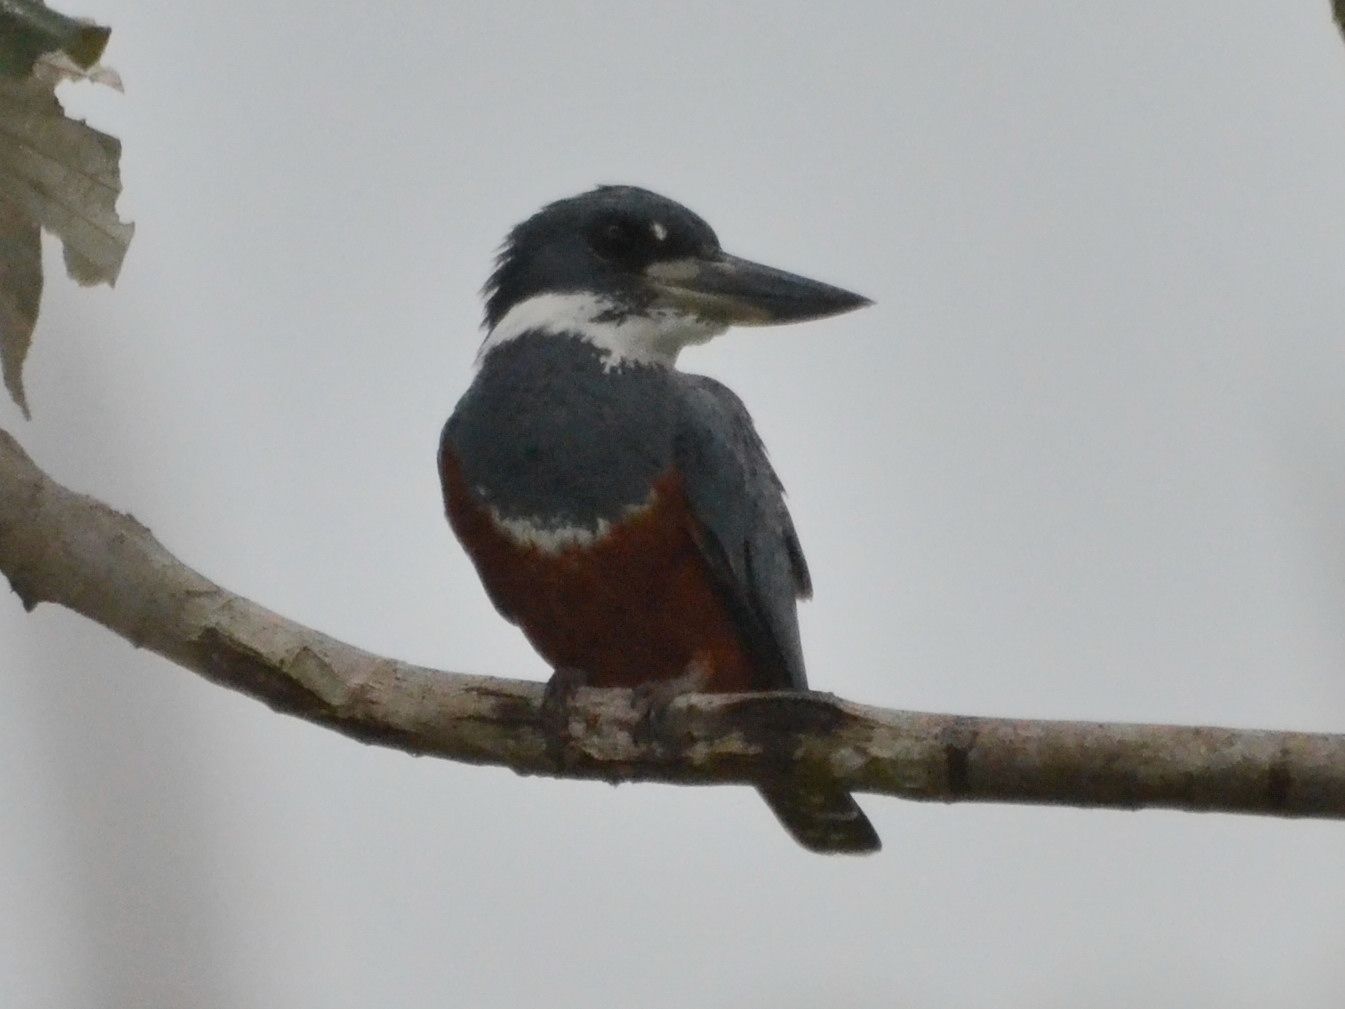 Click picture to see more Ringed Kingfishers.